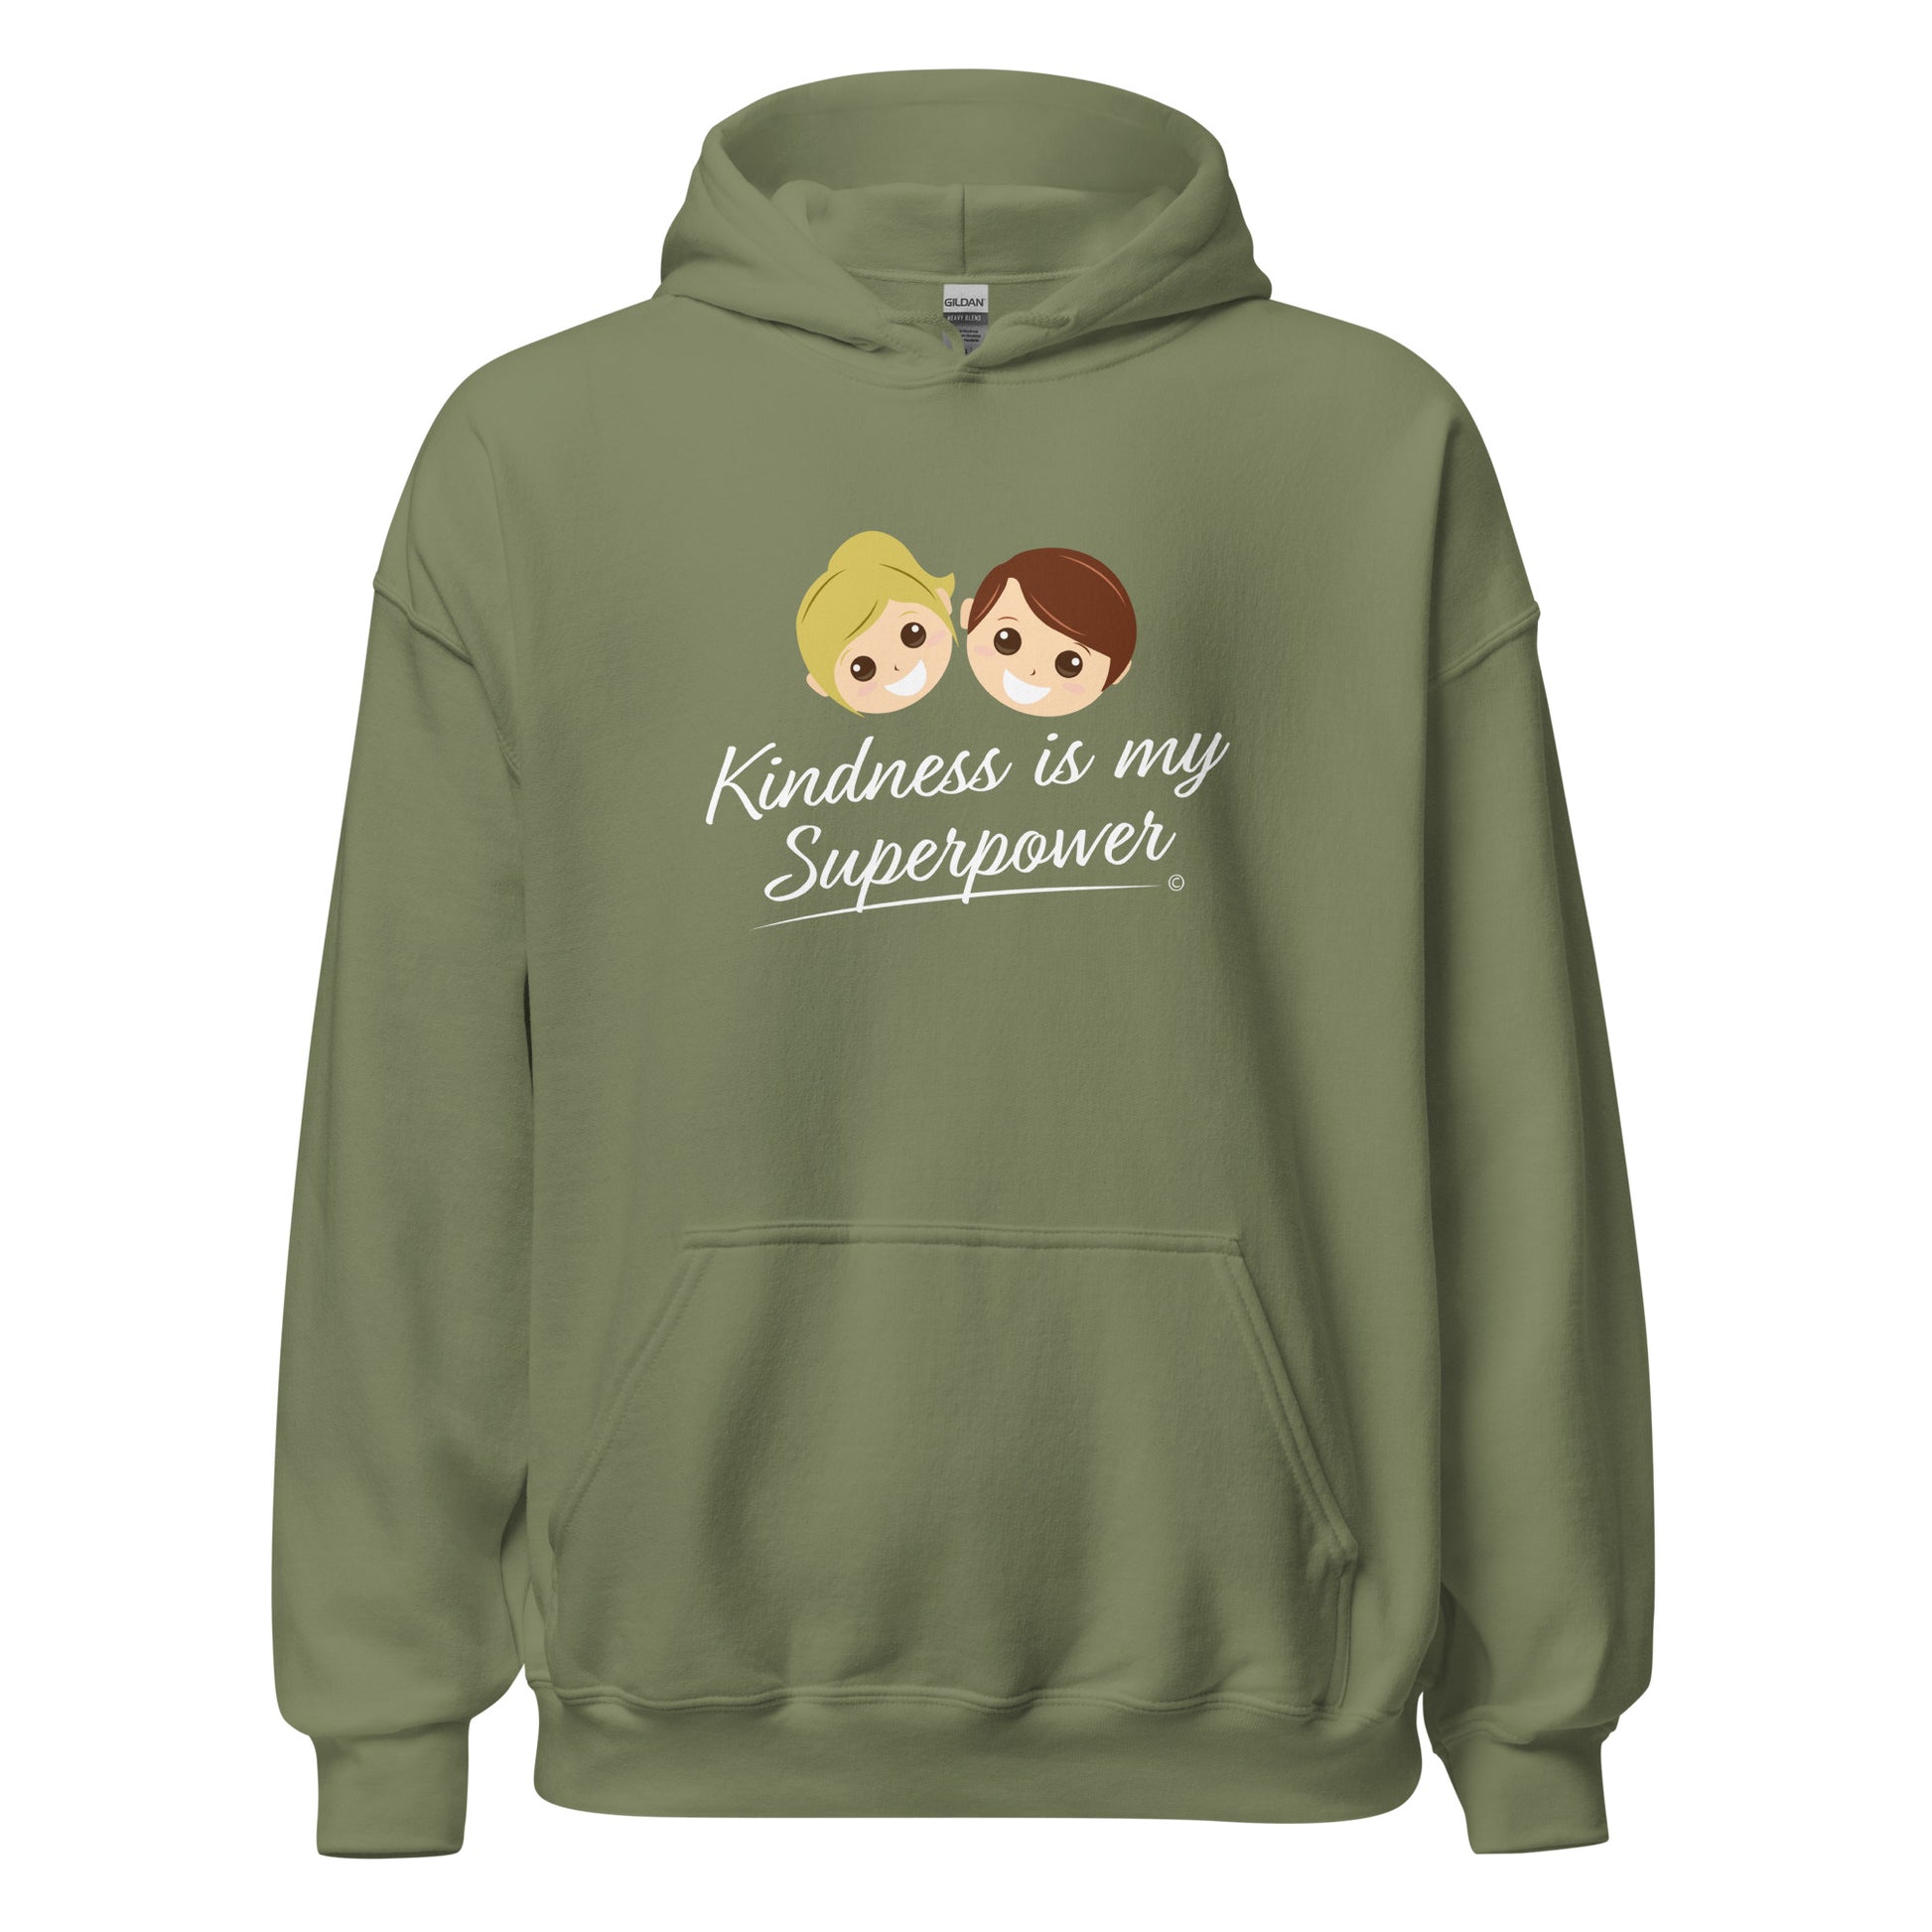 A cozy unisex hoodie in military green featuring the uplifting quote 'Kindness is my Superpower' in bold lettering.